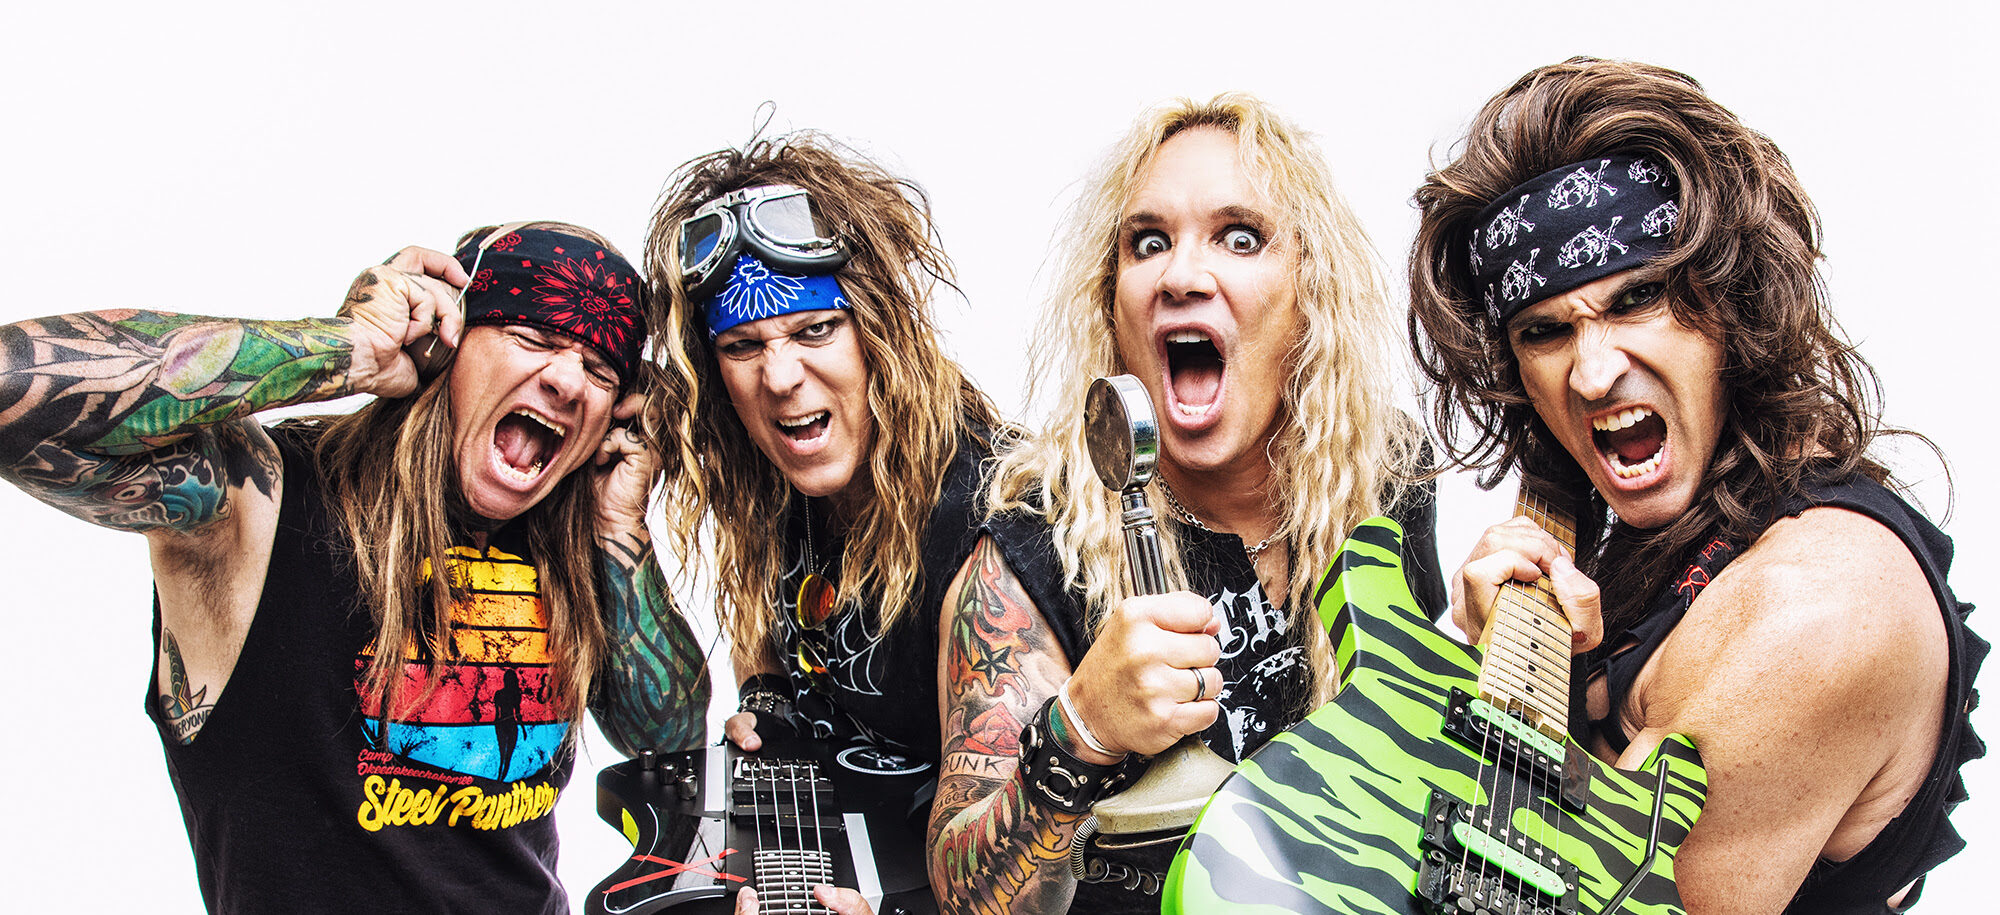 Gig review: STEEL PANTHER and AIRBOURNE at Hordern Pavilion, Sydney